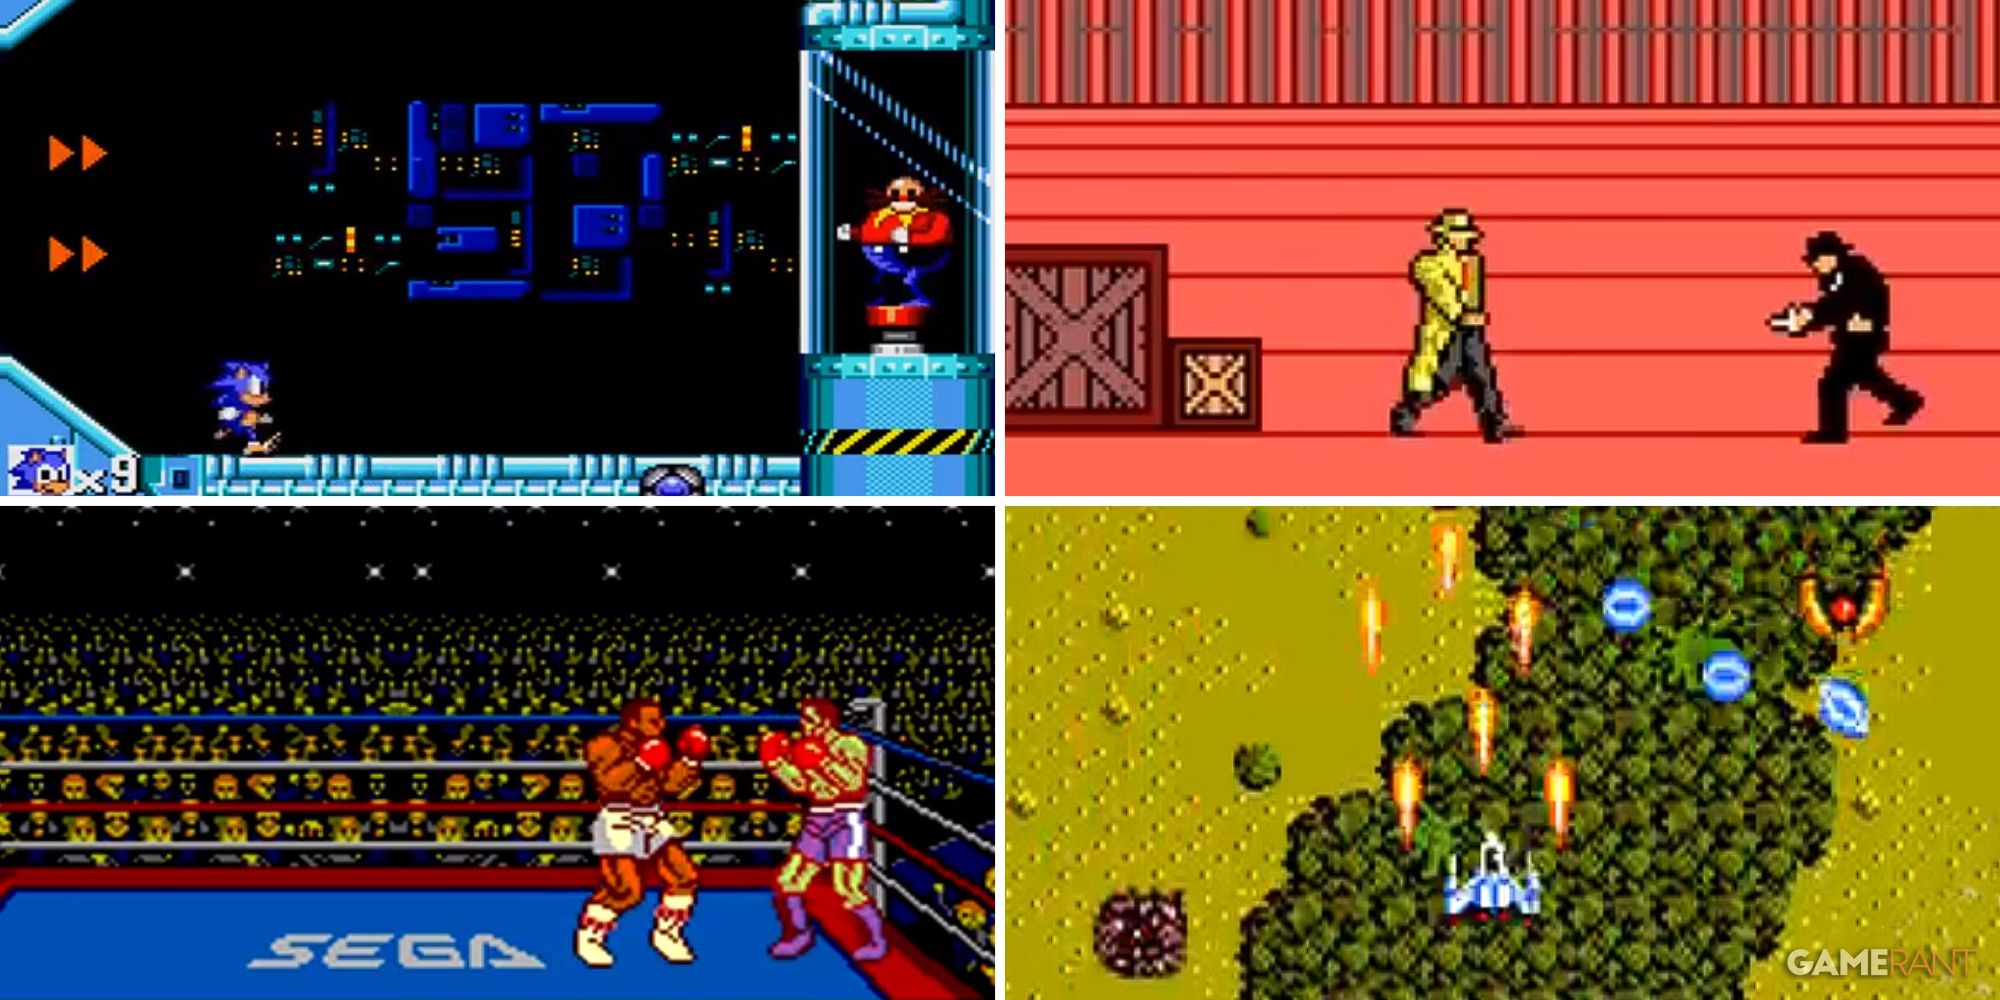 Some of the rarest and most expensive games for the Sega Master System